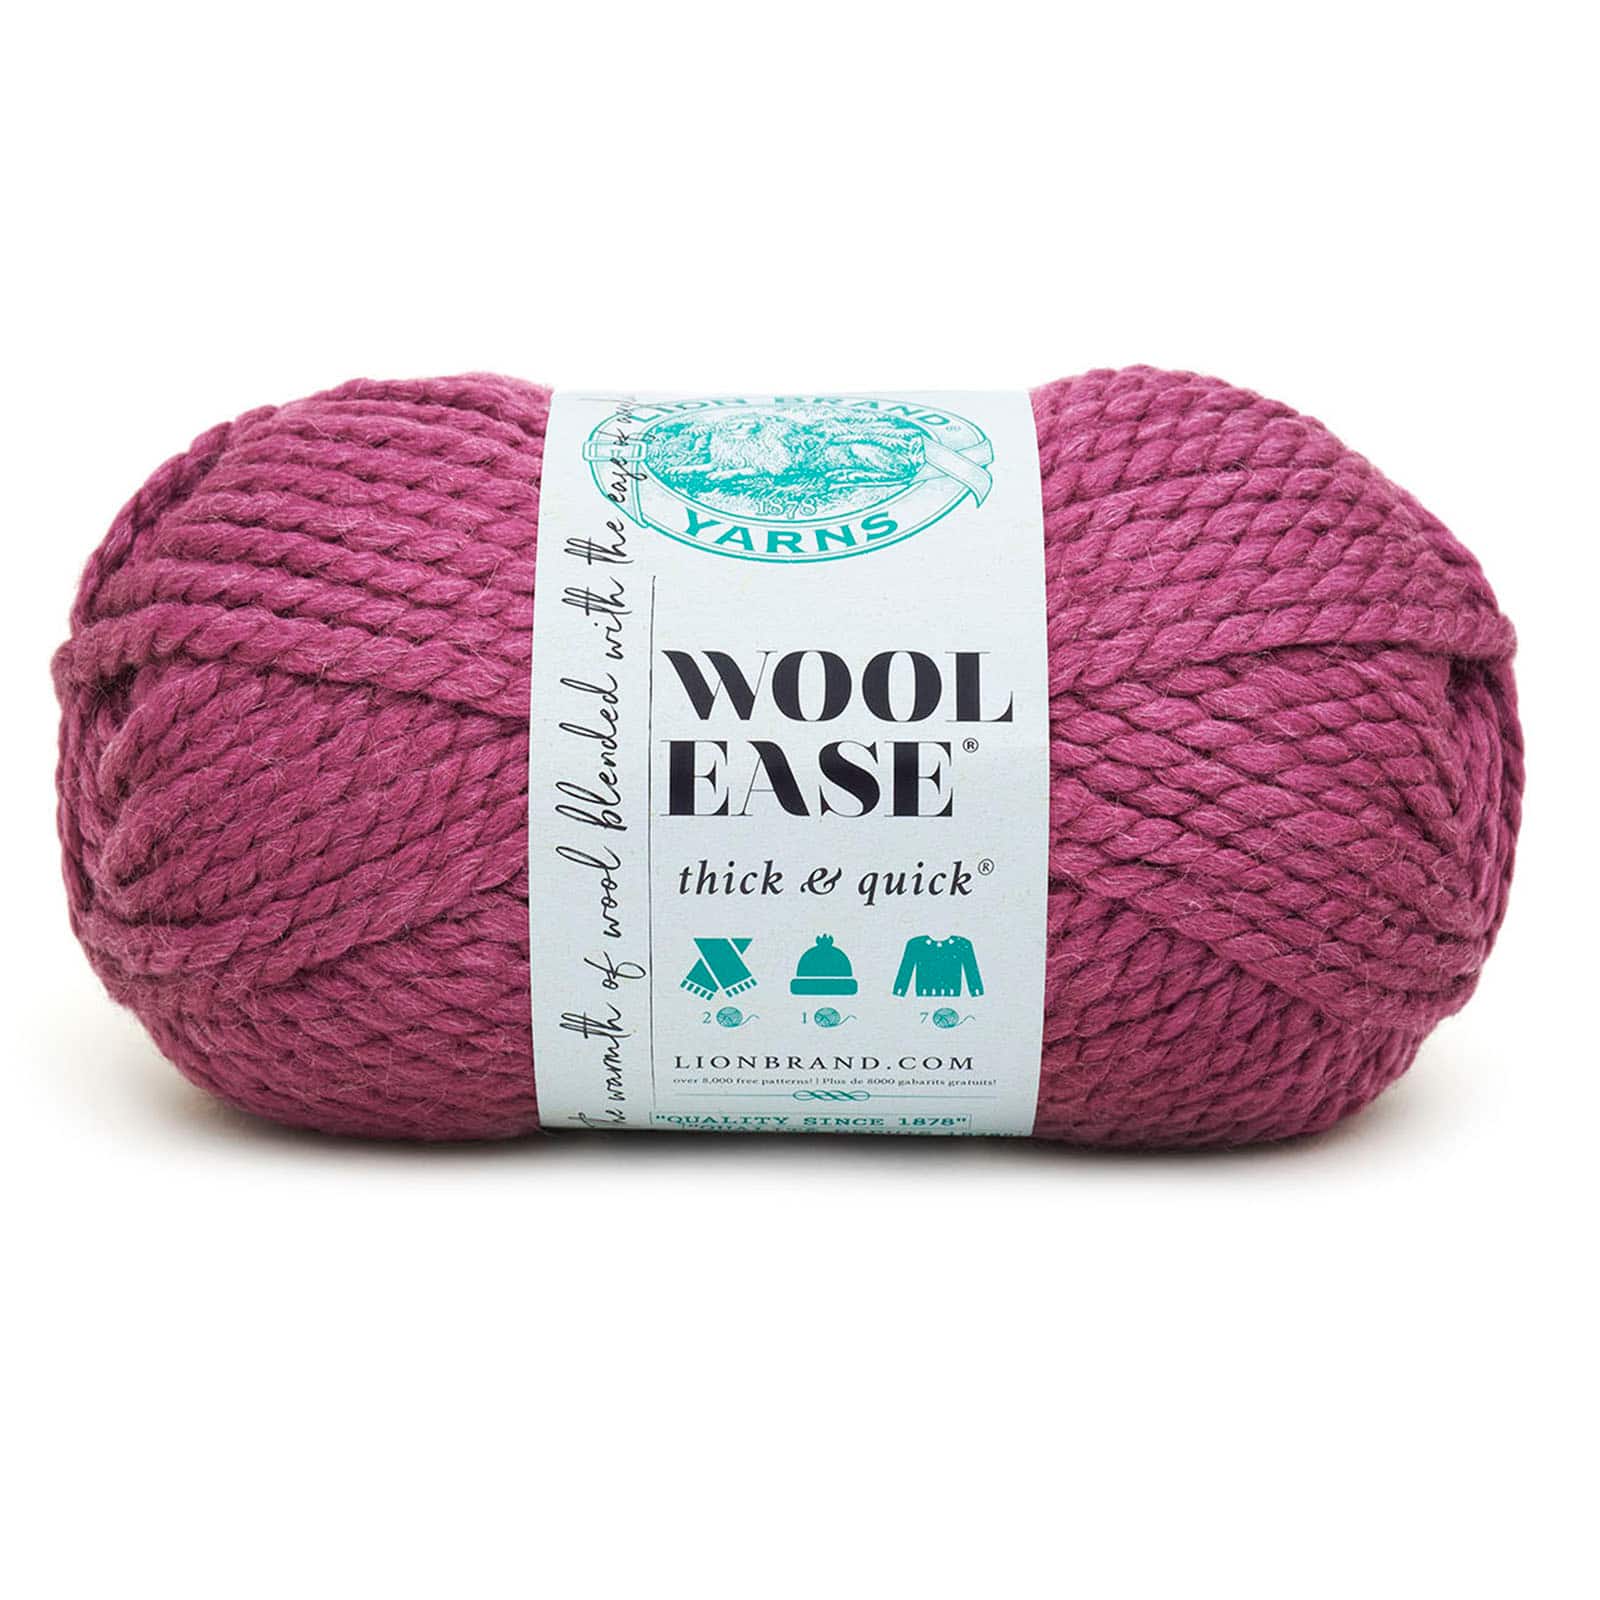 Lion Brand Yarns Wool Ease Thick & Quick Cranberry Classic Yarn, 1